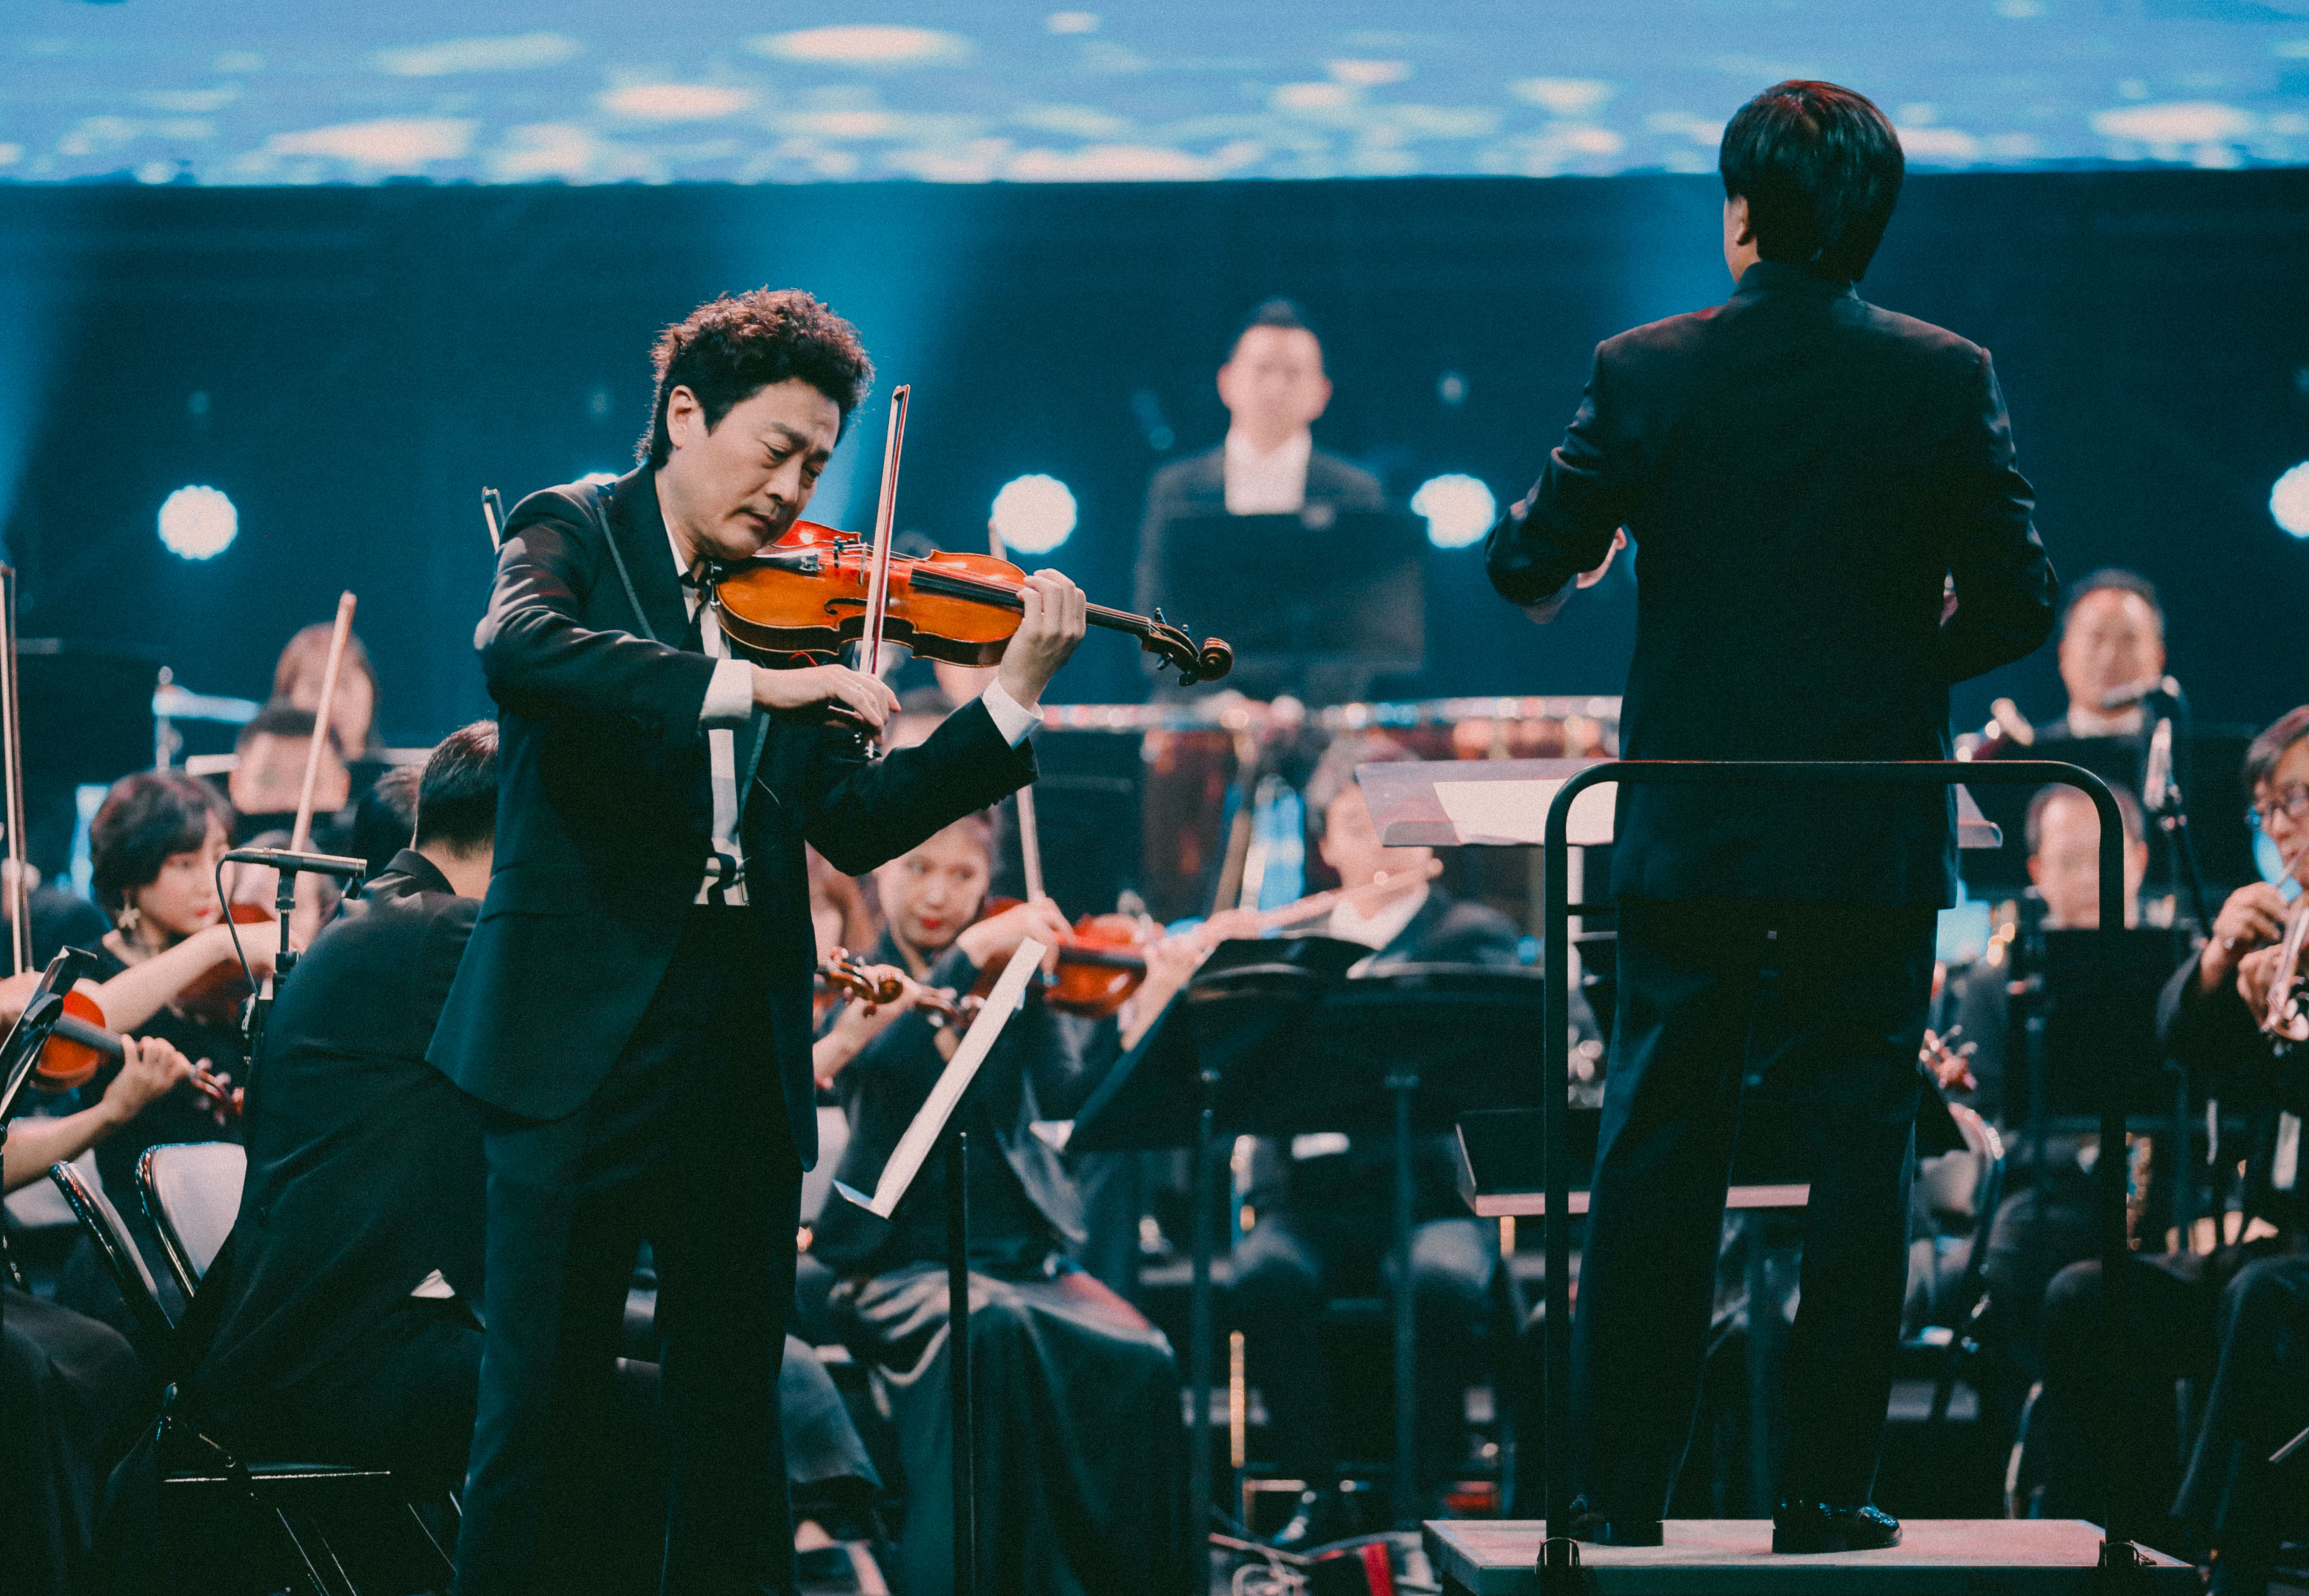 Watch it again: Online concert celebrating 50th anniversary of Sino-Italy diplomatic relations